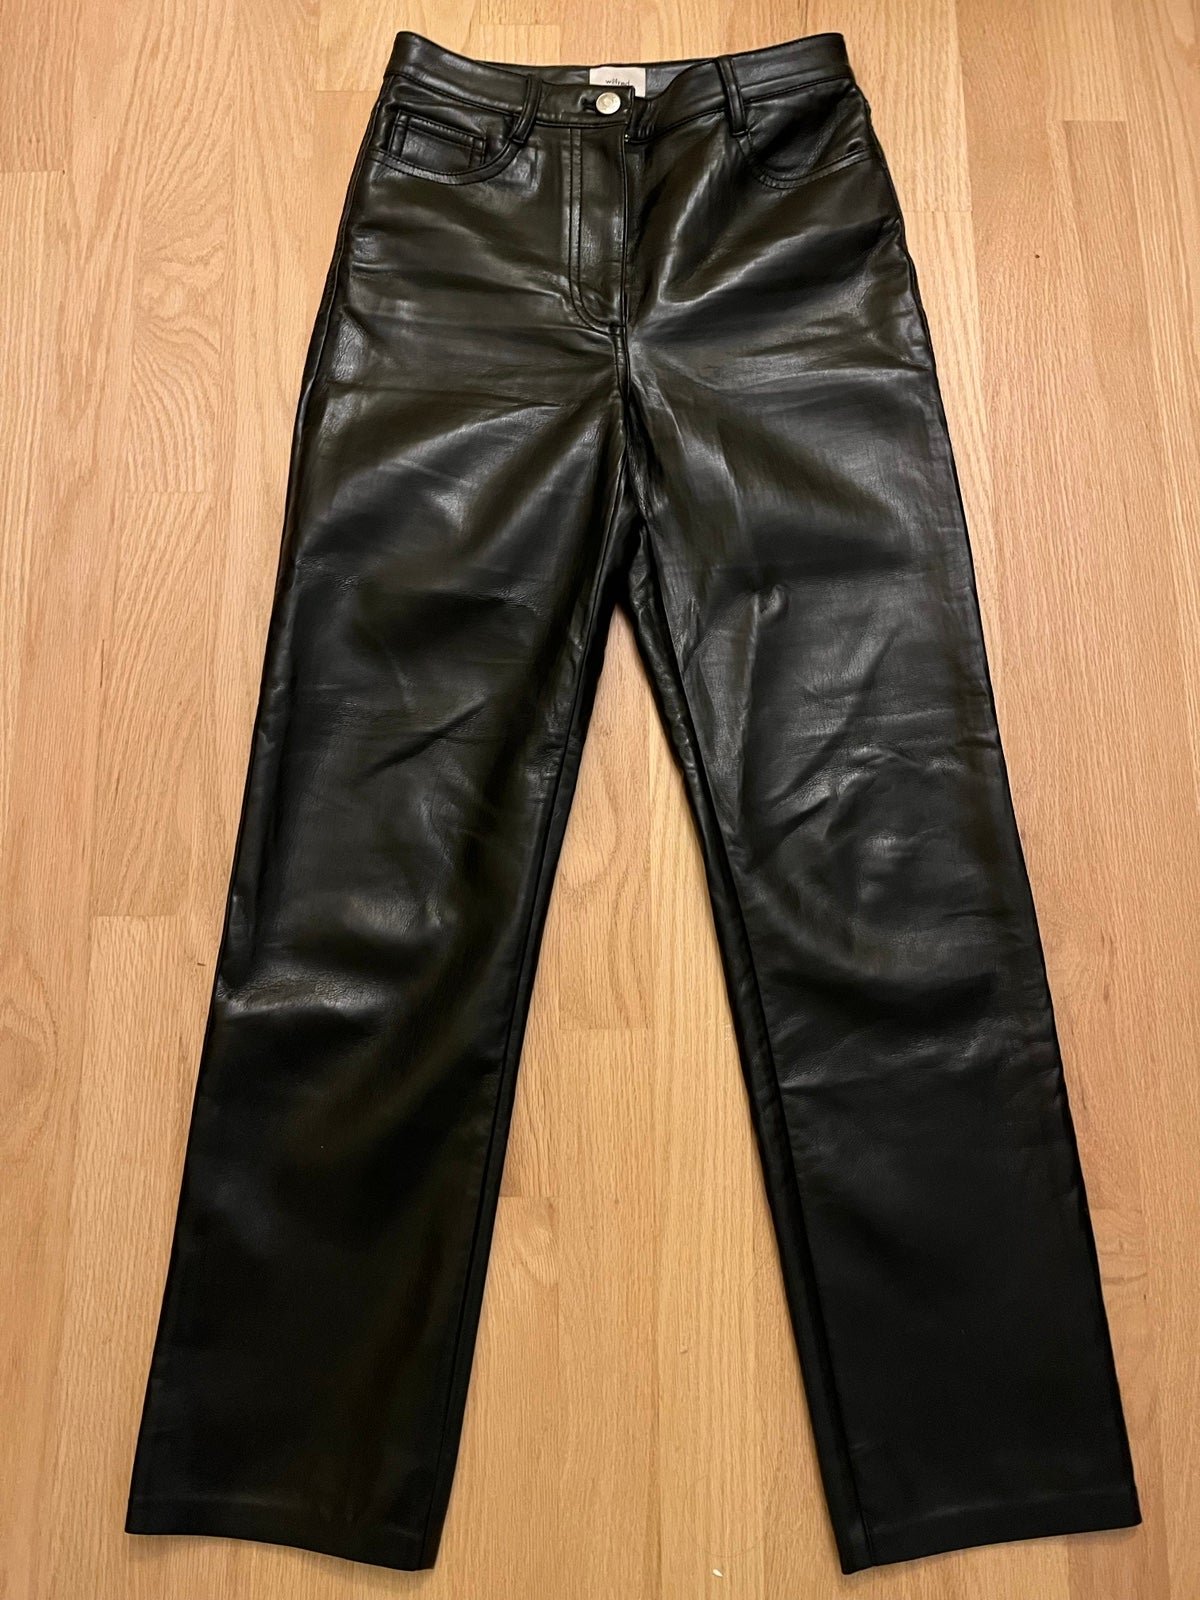 the Lowest price Aritzia High Waisted Leather Pants G30